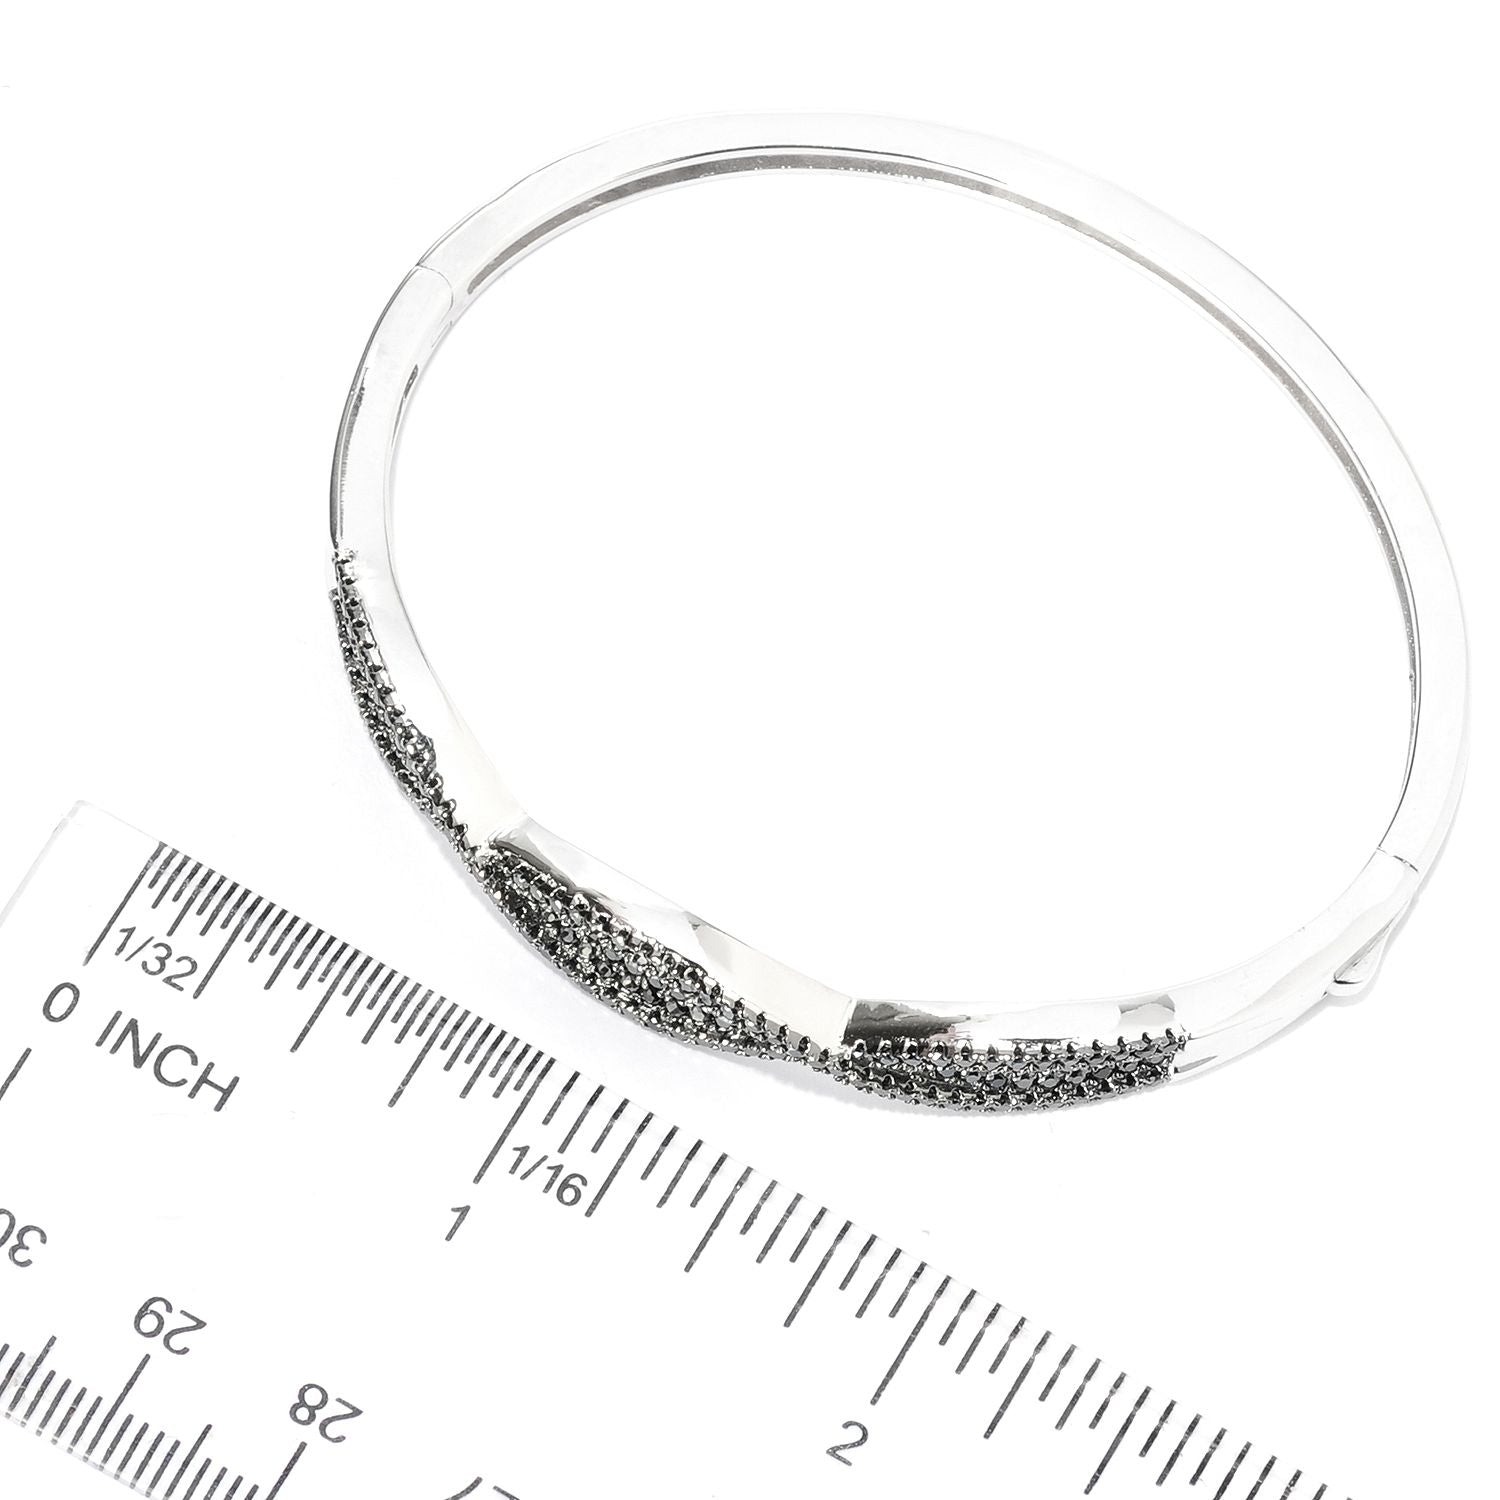 Rhodium Plated Sterling Silver 1.62ct TGW Spinel Concave Twisted Bangle - Pinctore